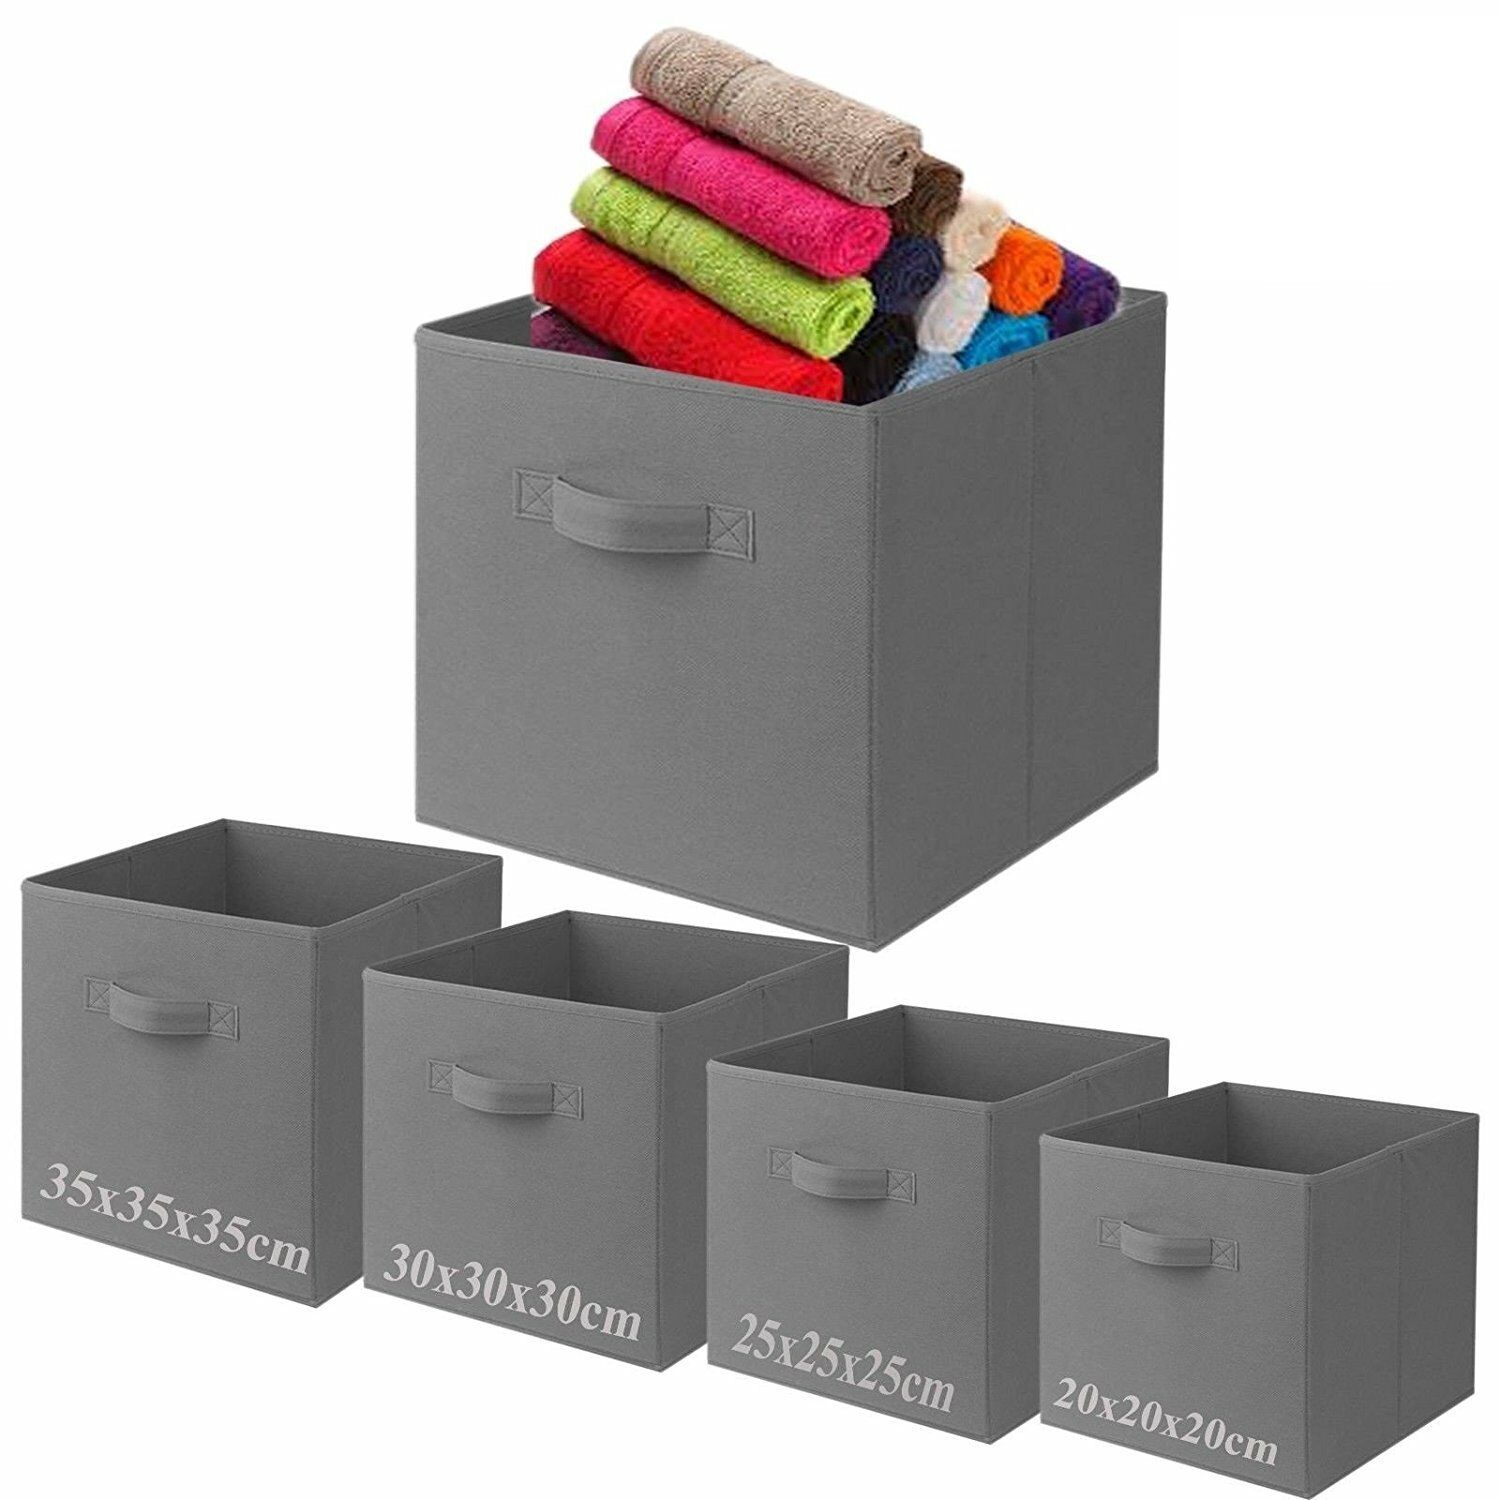 Grey Small Square Foldable Canvas Storage Collapsible Folding Box Fabric Kids Cubes Toys